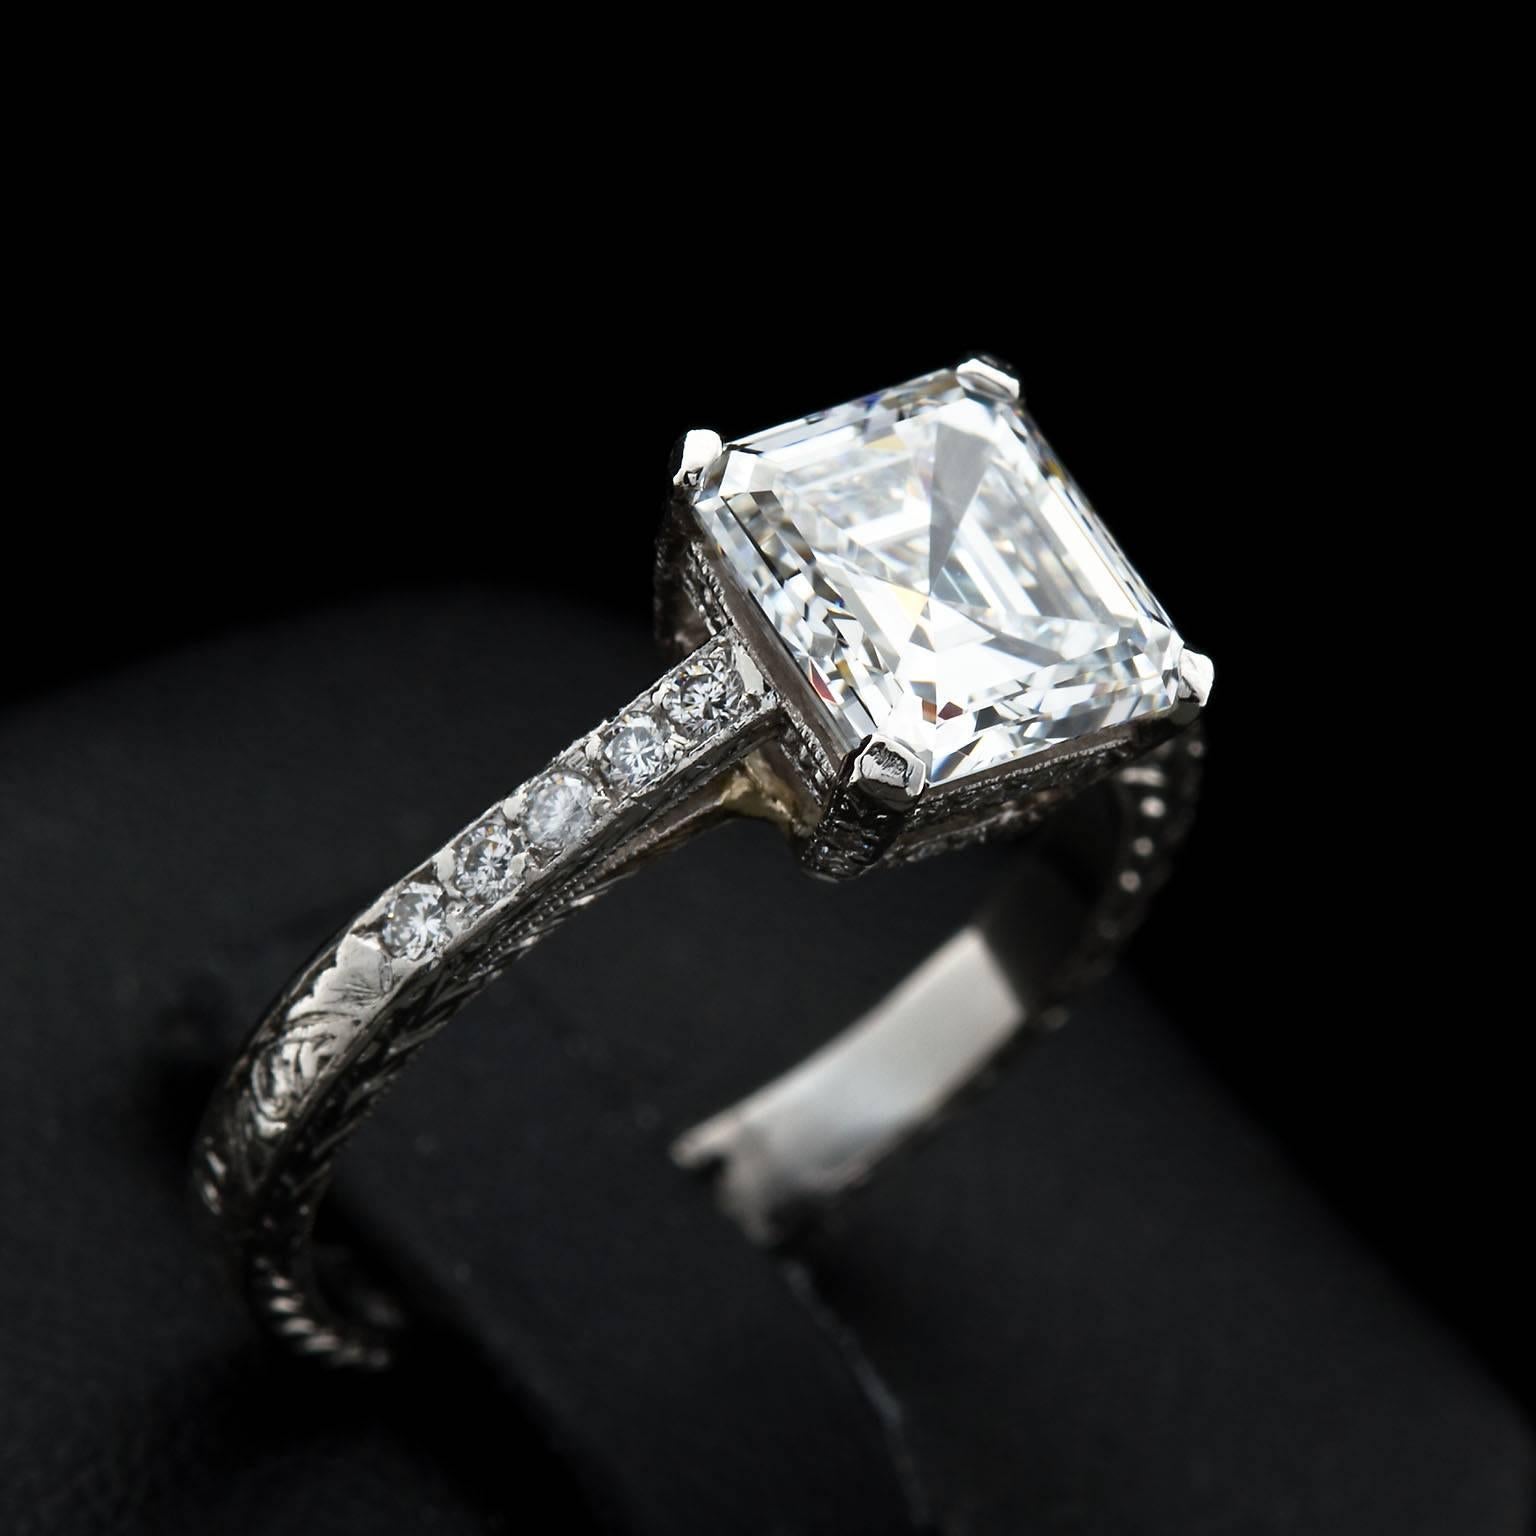 A vintage diamond in platinum engagement ring set with a center 2.52 ct. E color VVS2 clarity (GIA certified) square emerald or Asscher cut diamond and ten round diamond side stones weighing approx. 0.30 ctw.  The ring is a four-prong basket style